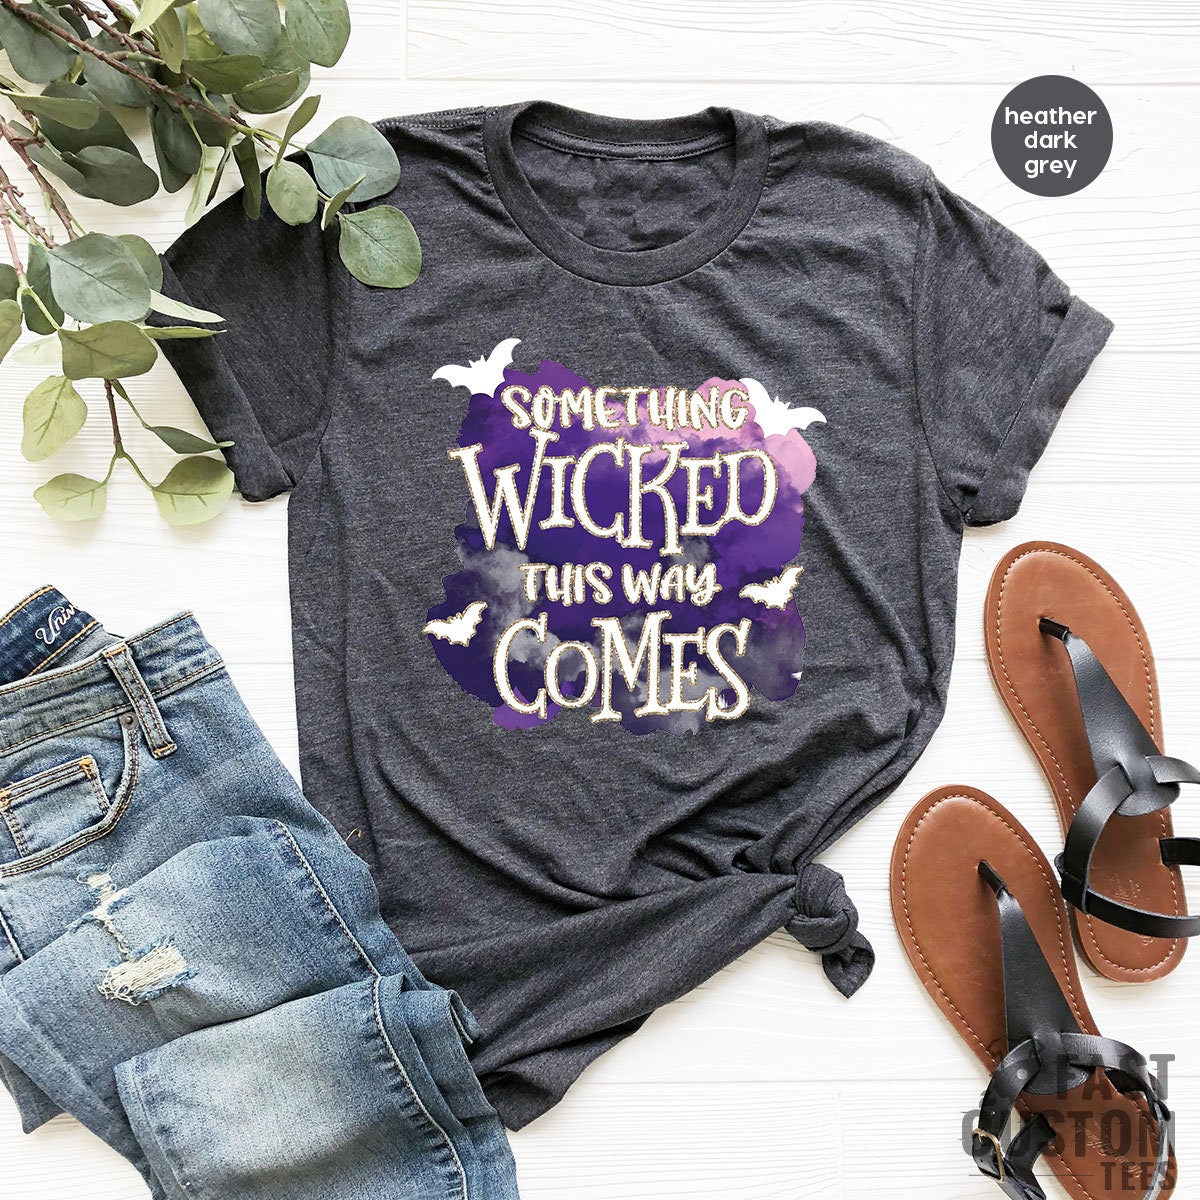 Something Wicked This Way Comes Shirt, Halloween Shirt, Spooky TShirt, Horror Shirts, Fall Shirt For Women, Witch Shirt, Halloween Party Tee - Fastdeliverytees.com